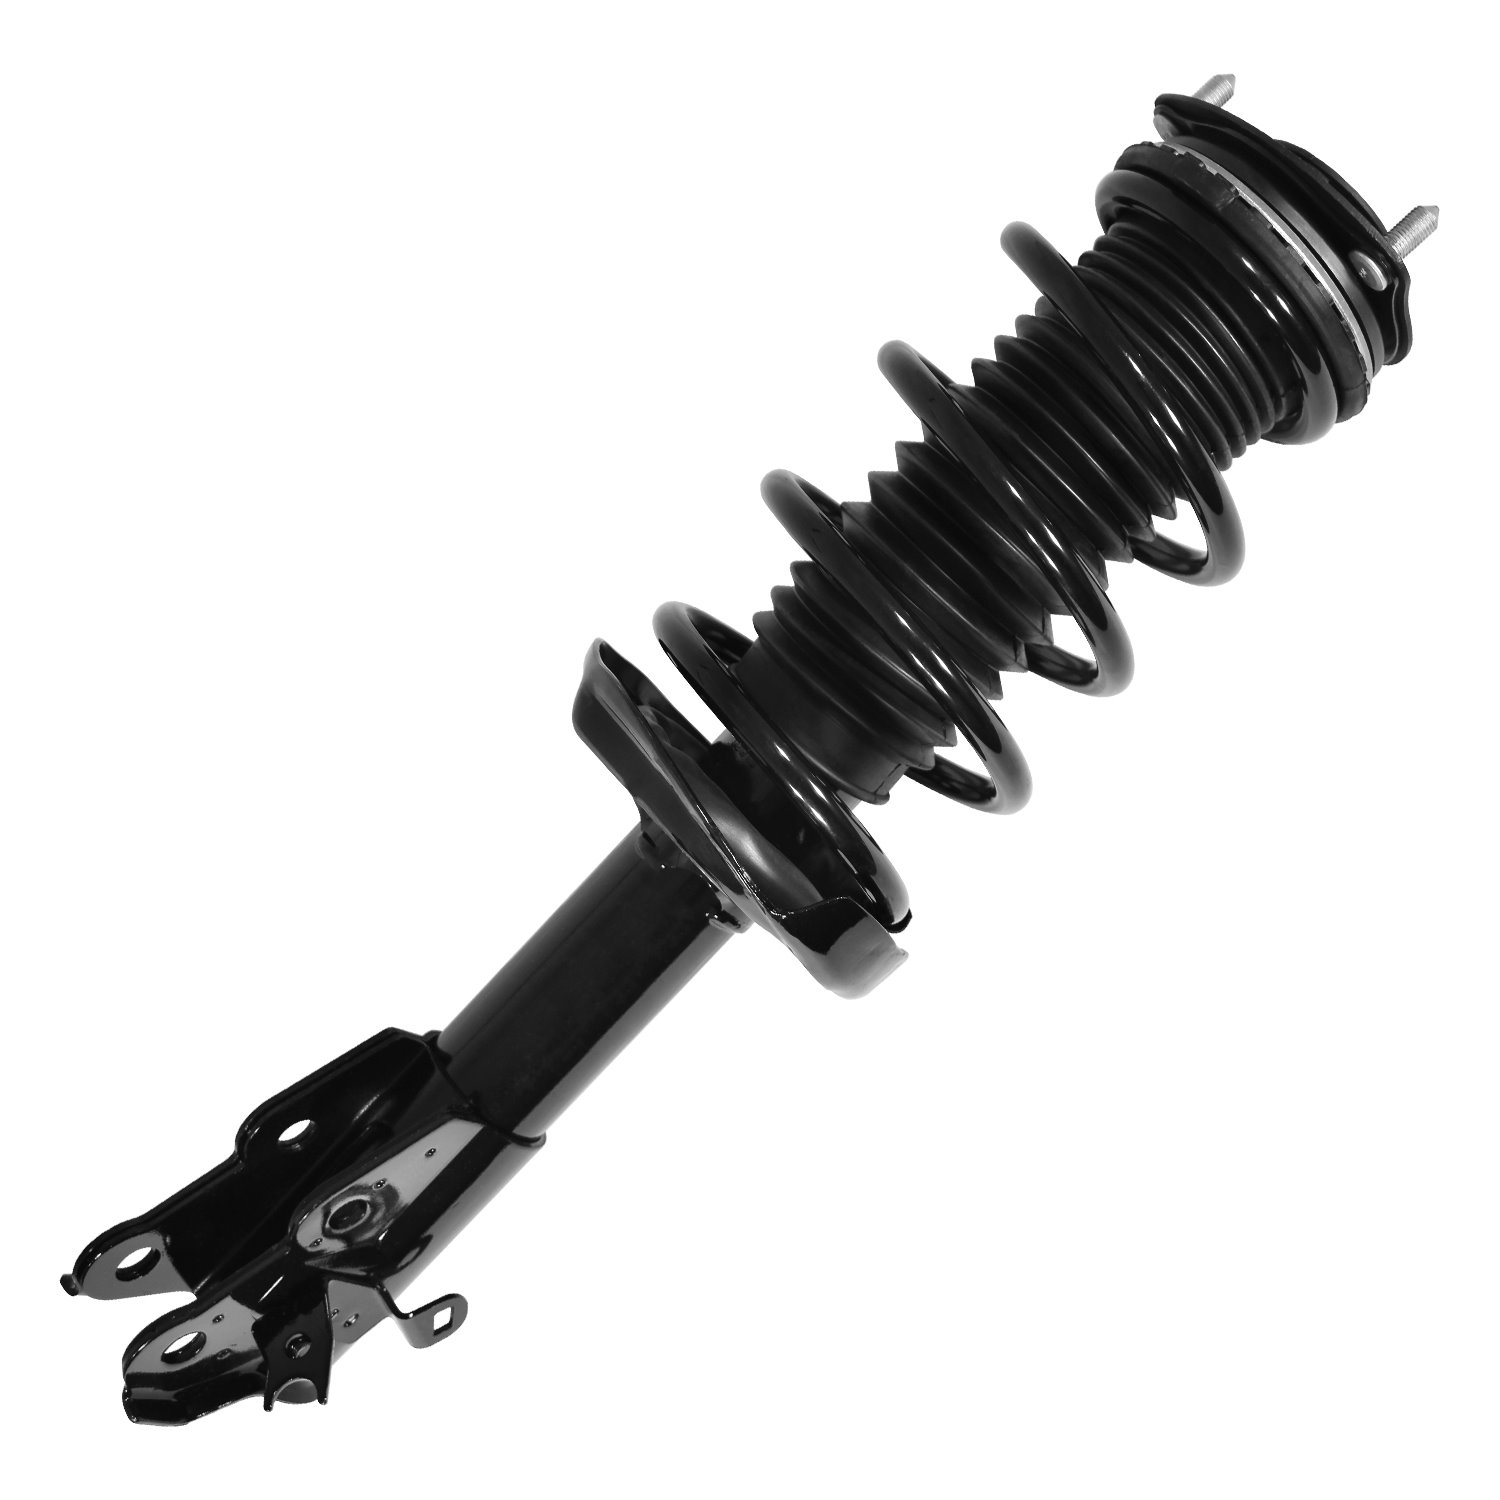 11815 Suspension Strut & Coil Spring Assembly Fits Select Acura CSX, Honda Civic